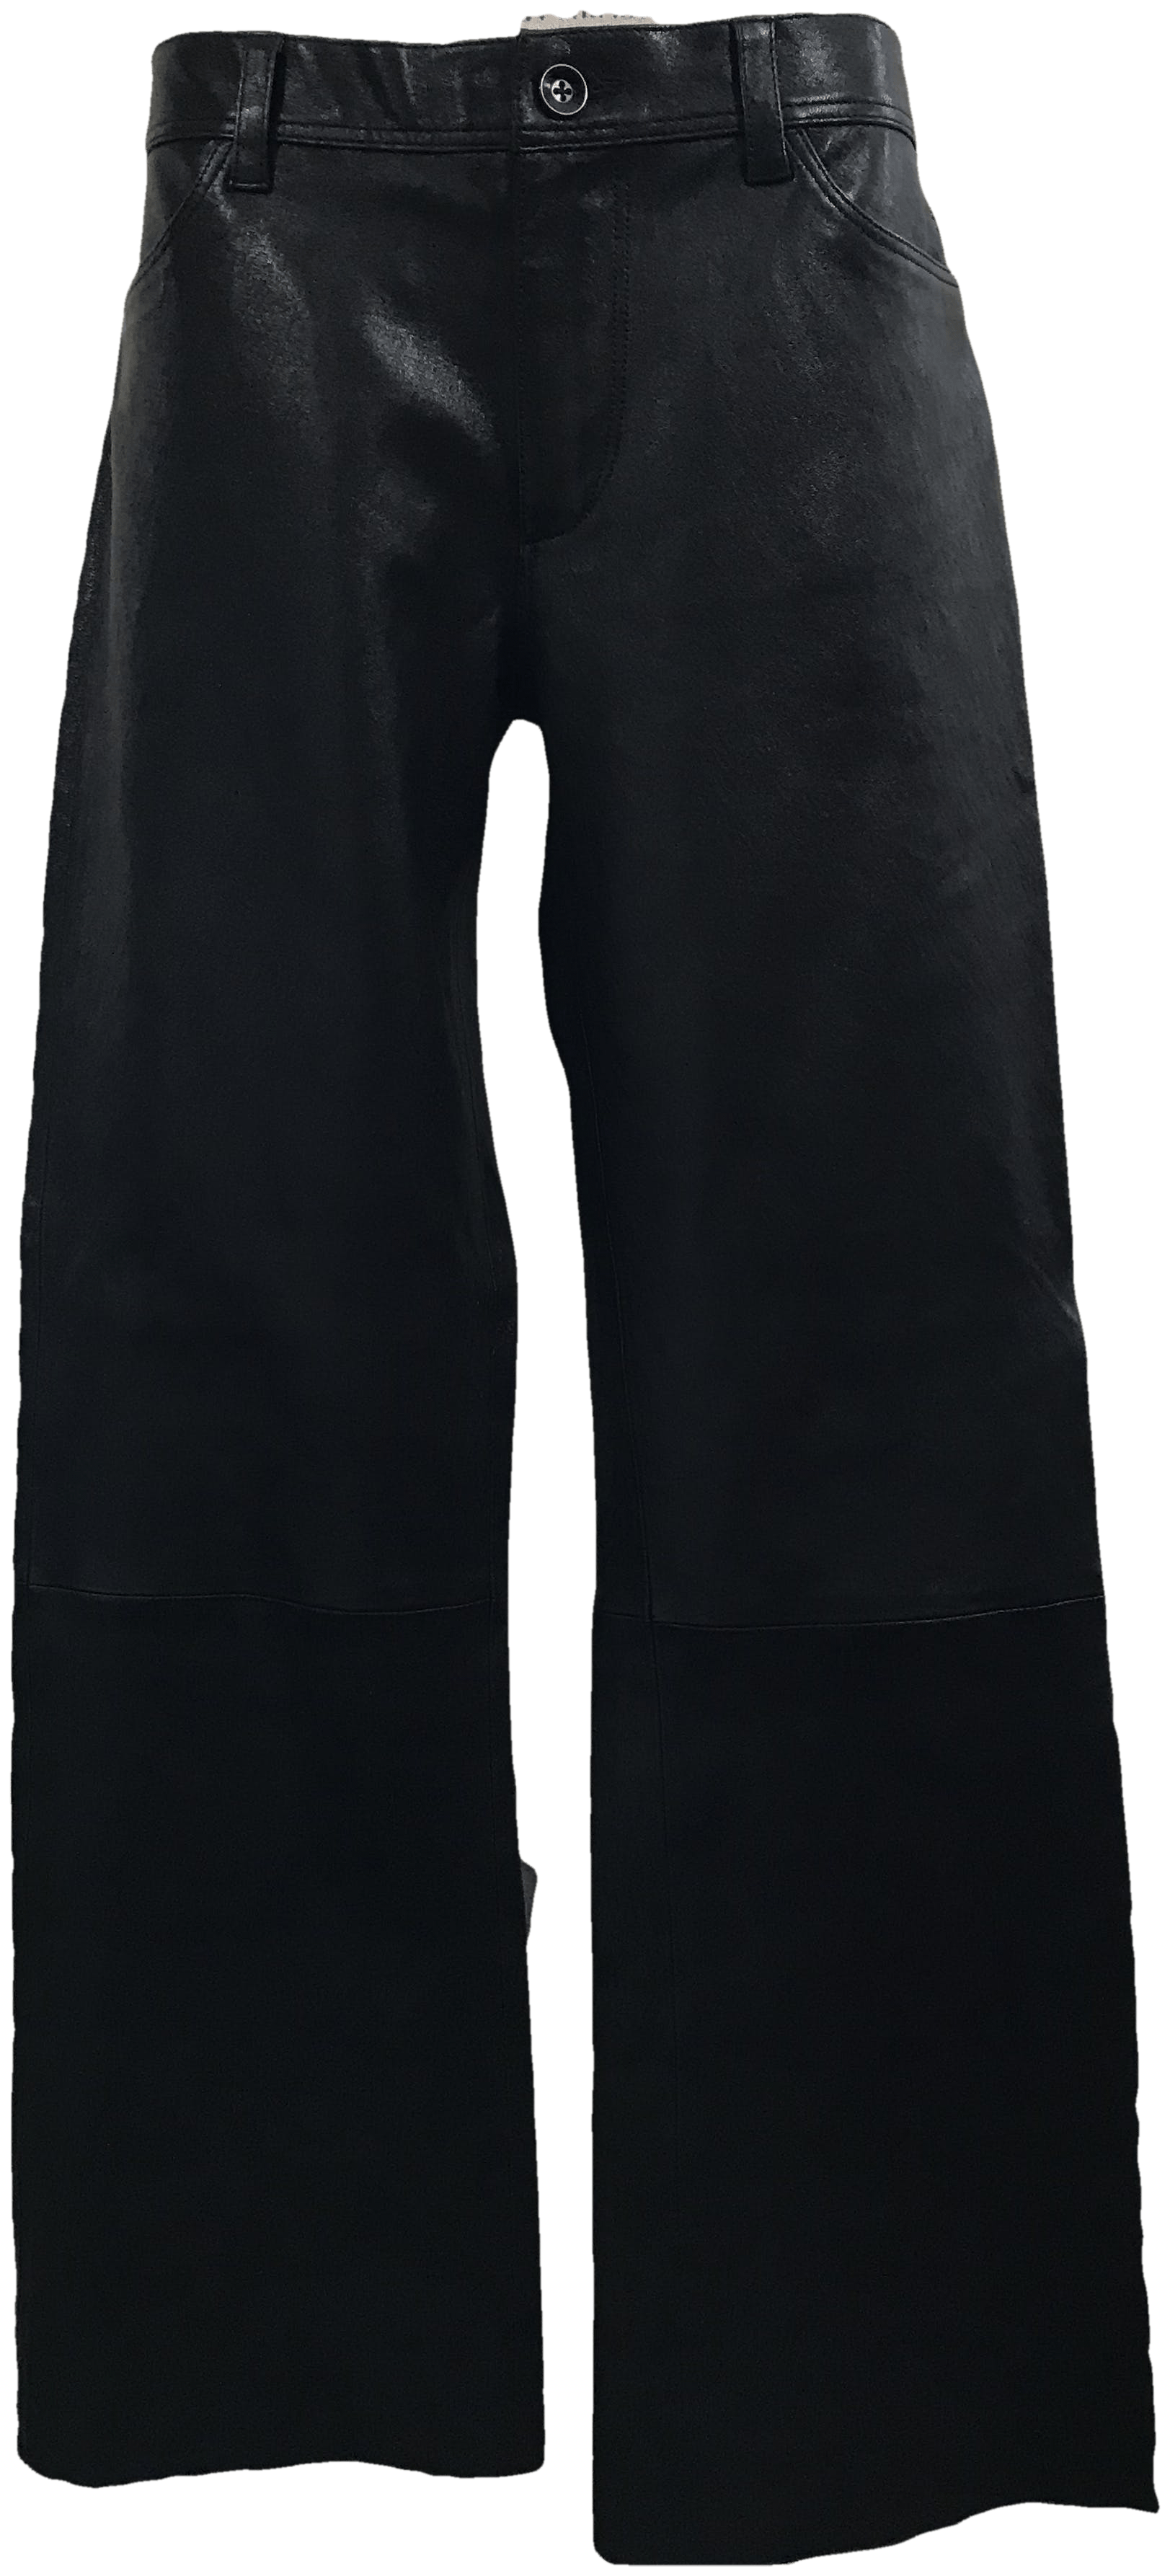 Vintage 90's Black Leather Mid-Rise Pants by Neely Mack | Shop THRILLING